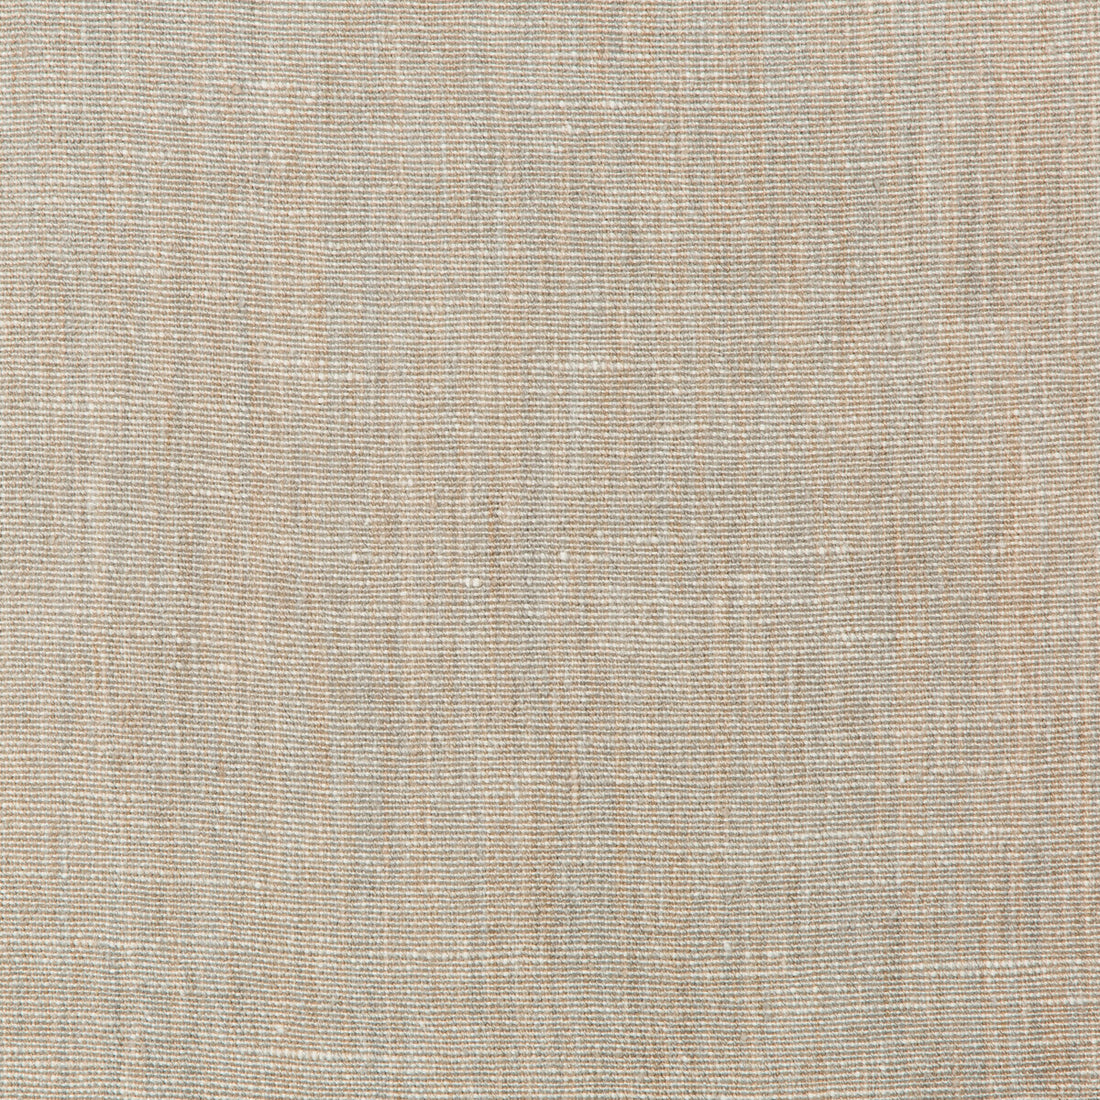 Lagos Linen fabric in driftwood color - pattern 35558.16.0 - by Kravet Couture in the Modern Colors-Sojourn Collection collection